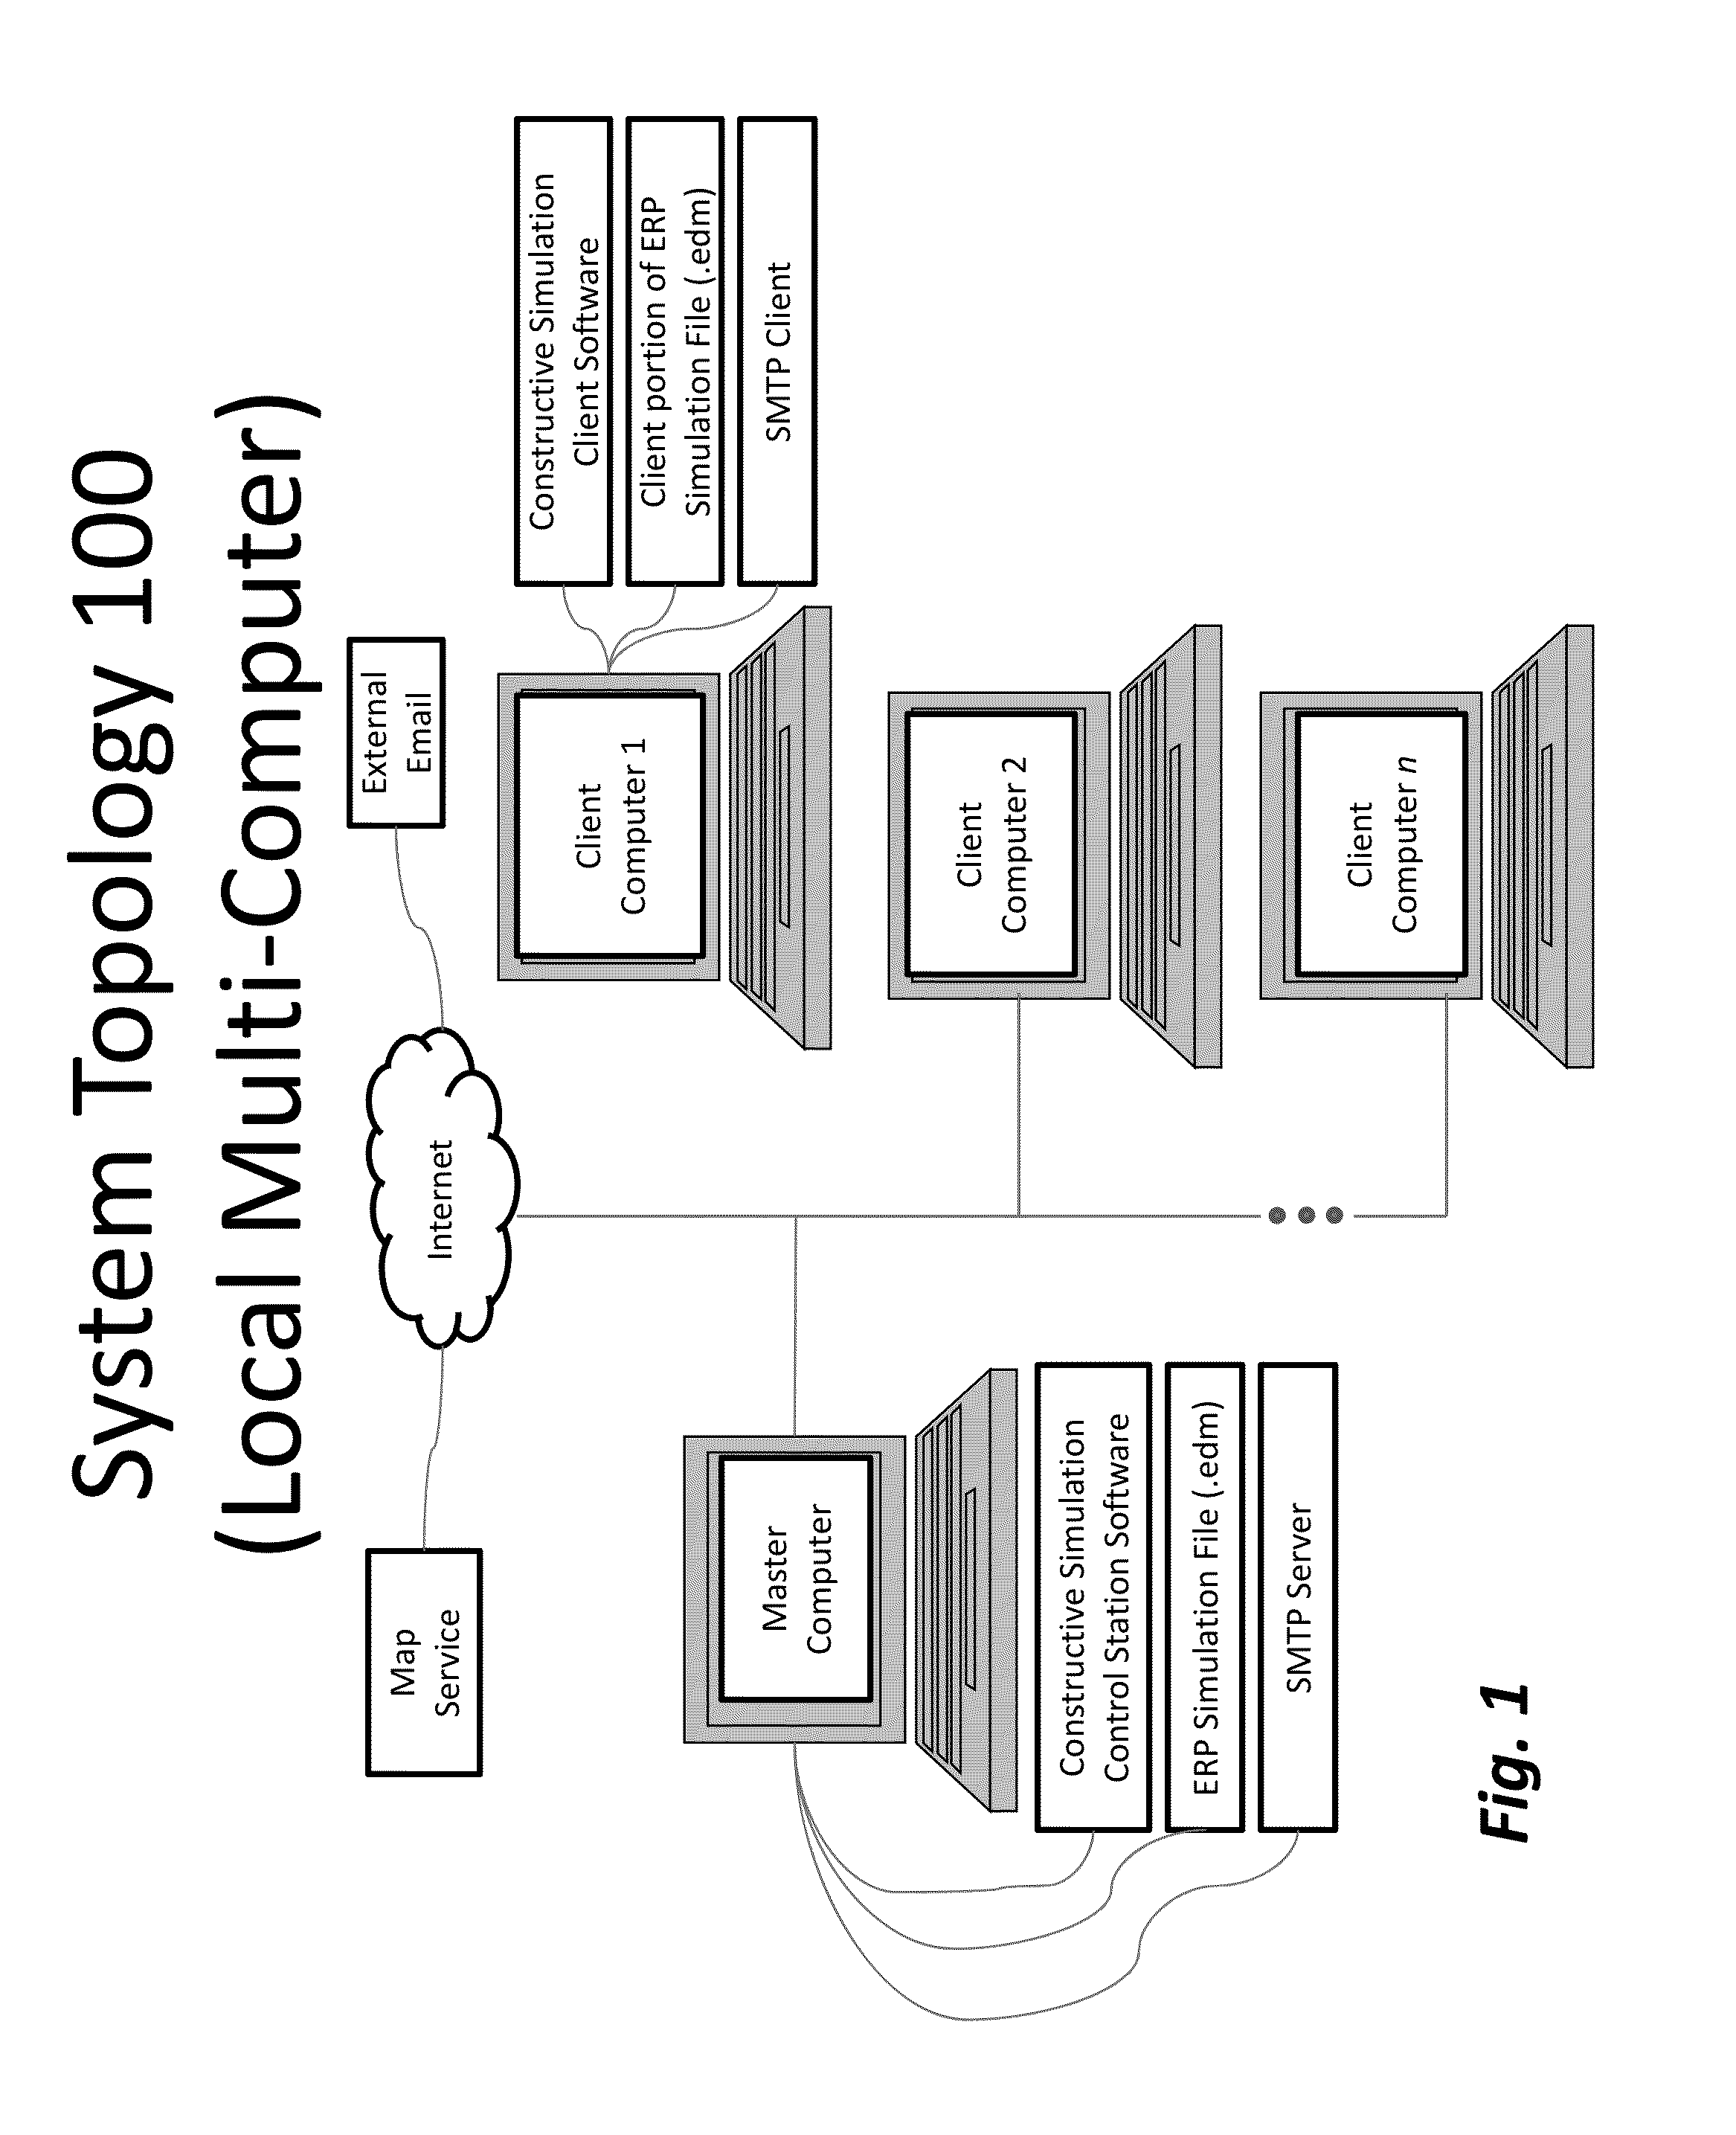 System and method for dynamic simulation of emergency response plans